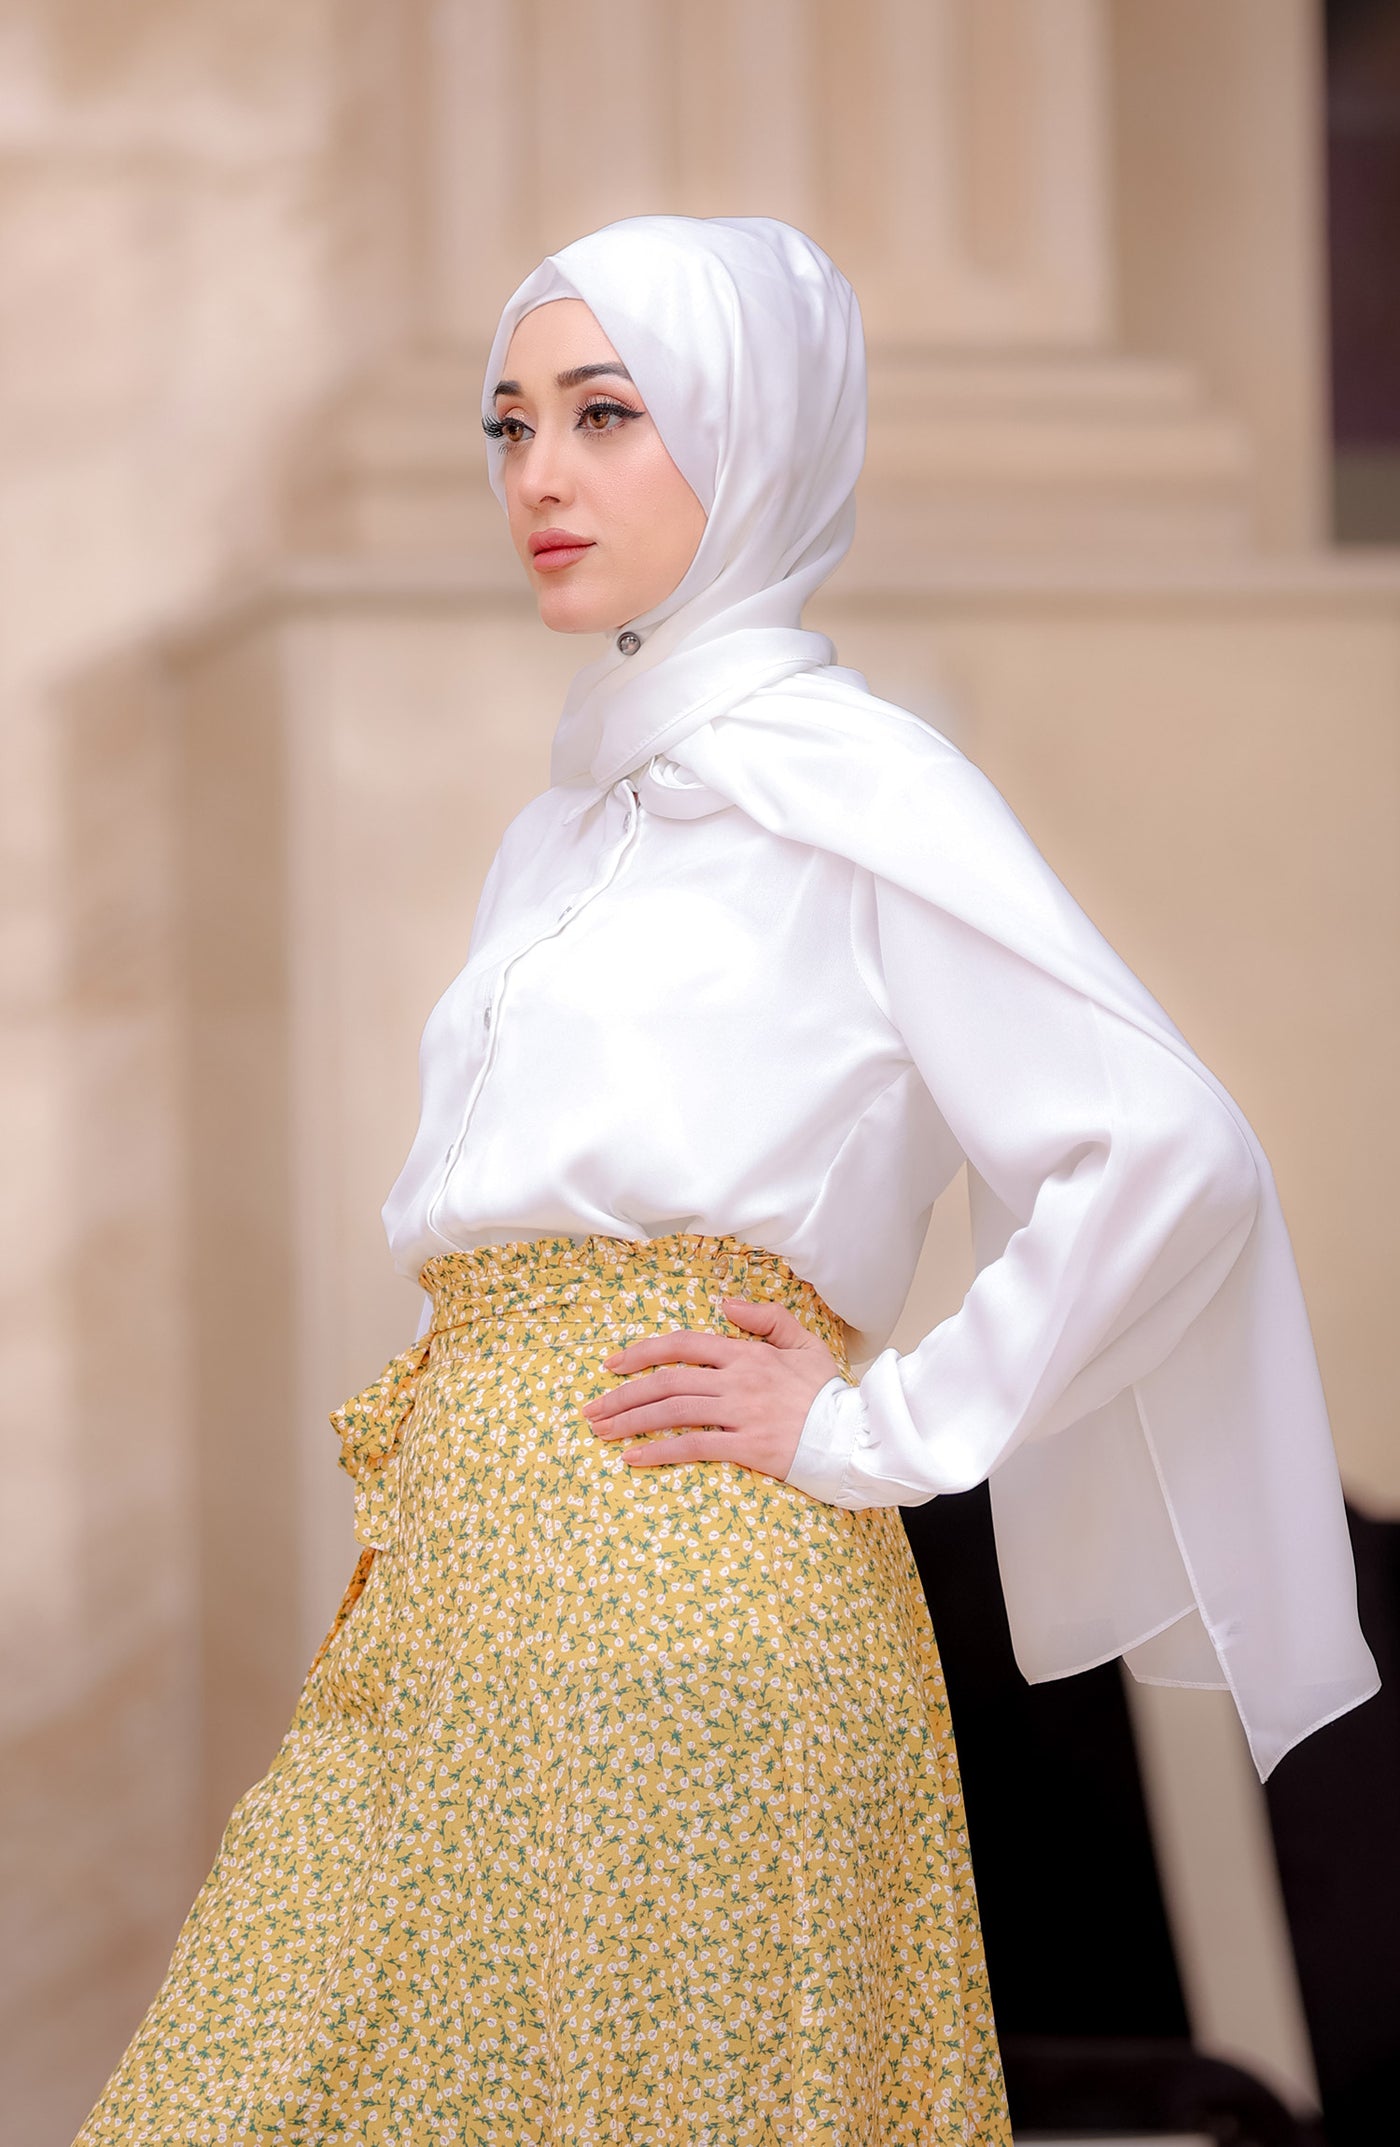 tropical floral print skirt with Hijab and top